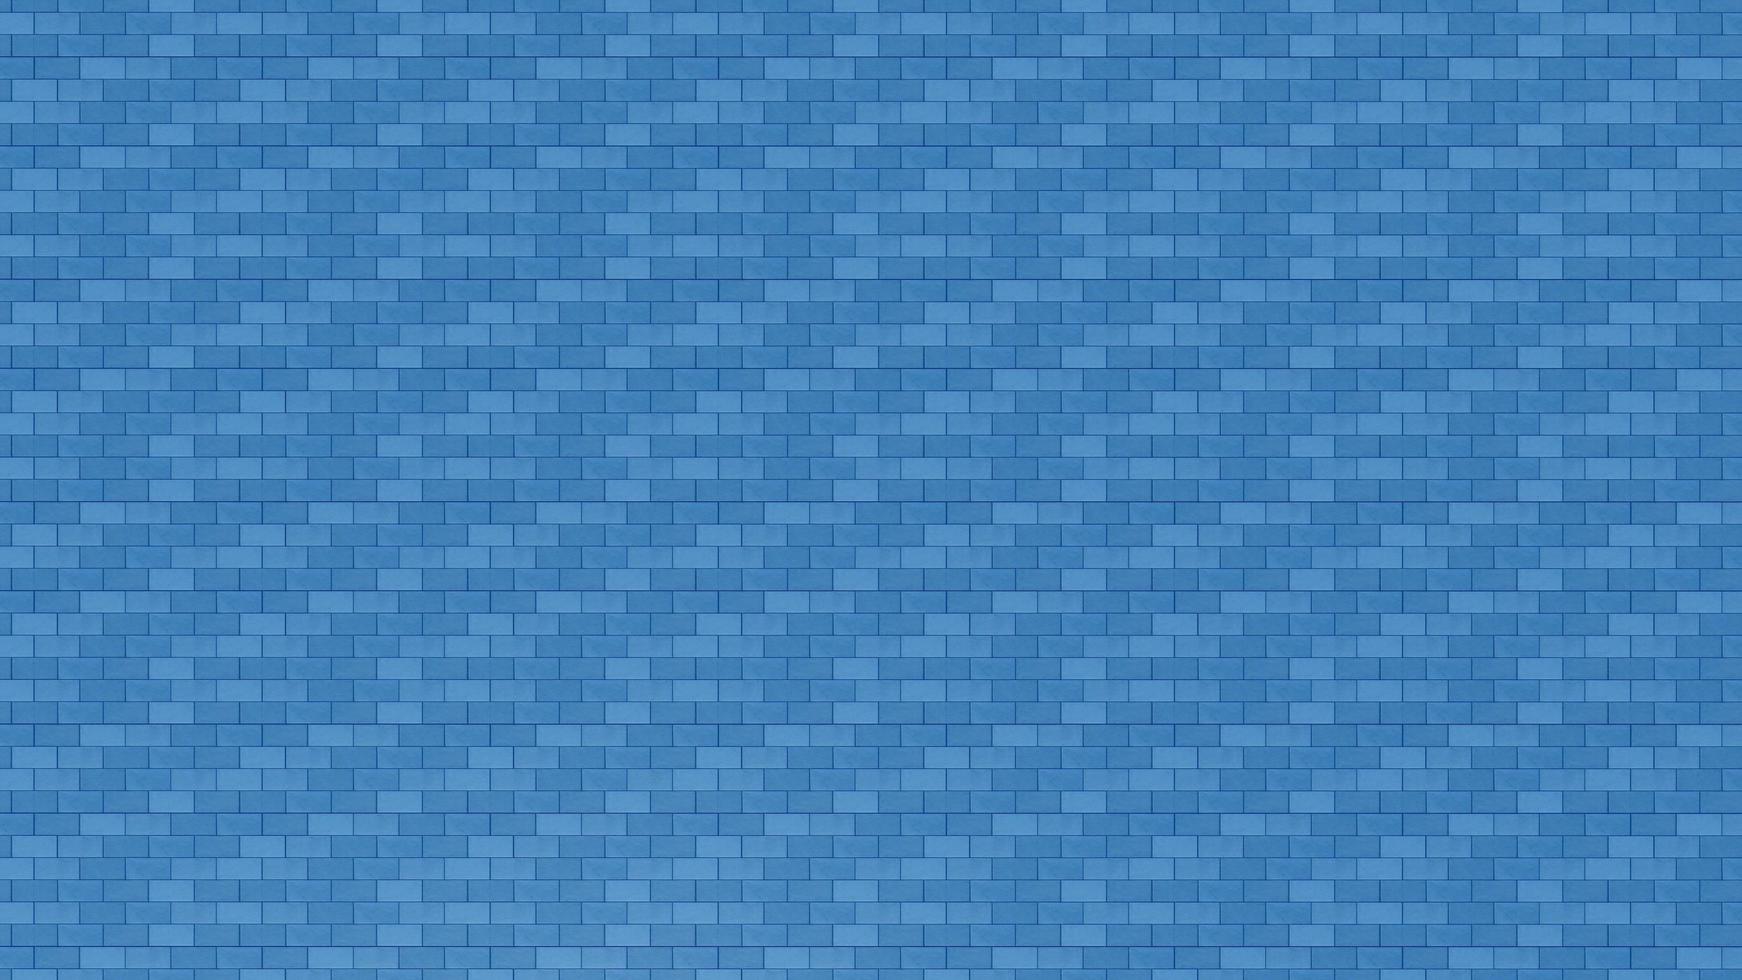 Stone pattern blue for background or cover photo